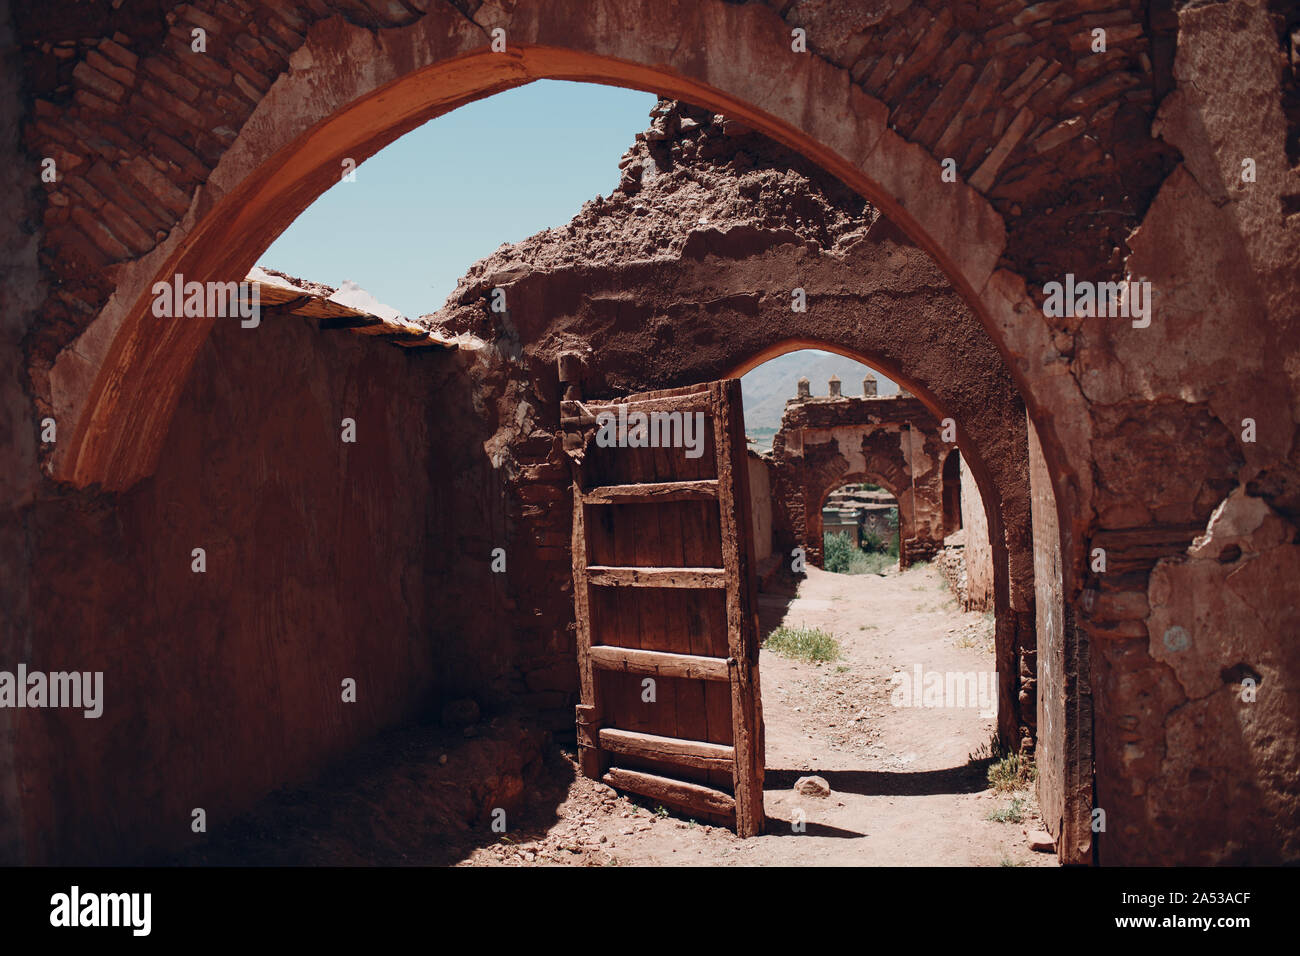 Old city walls and gates in Morocco Stock Photo